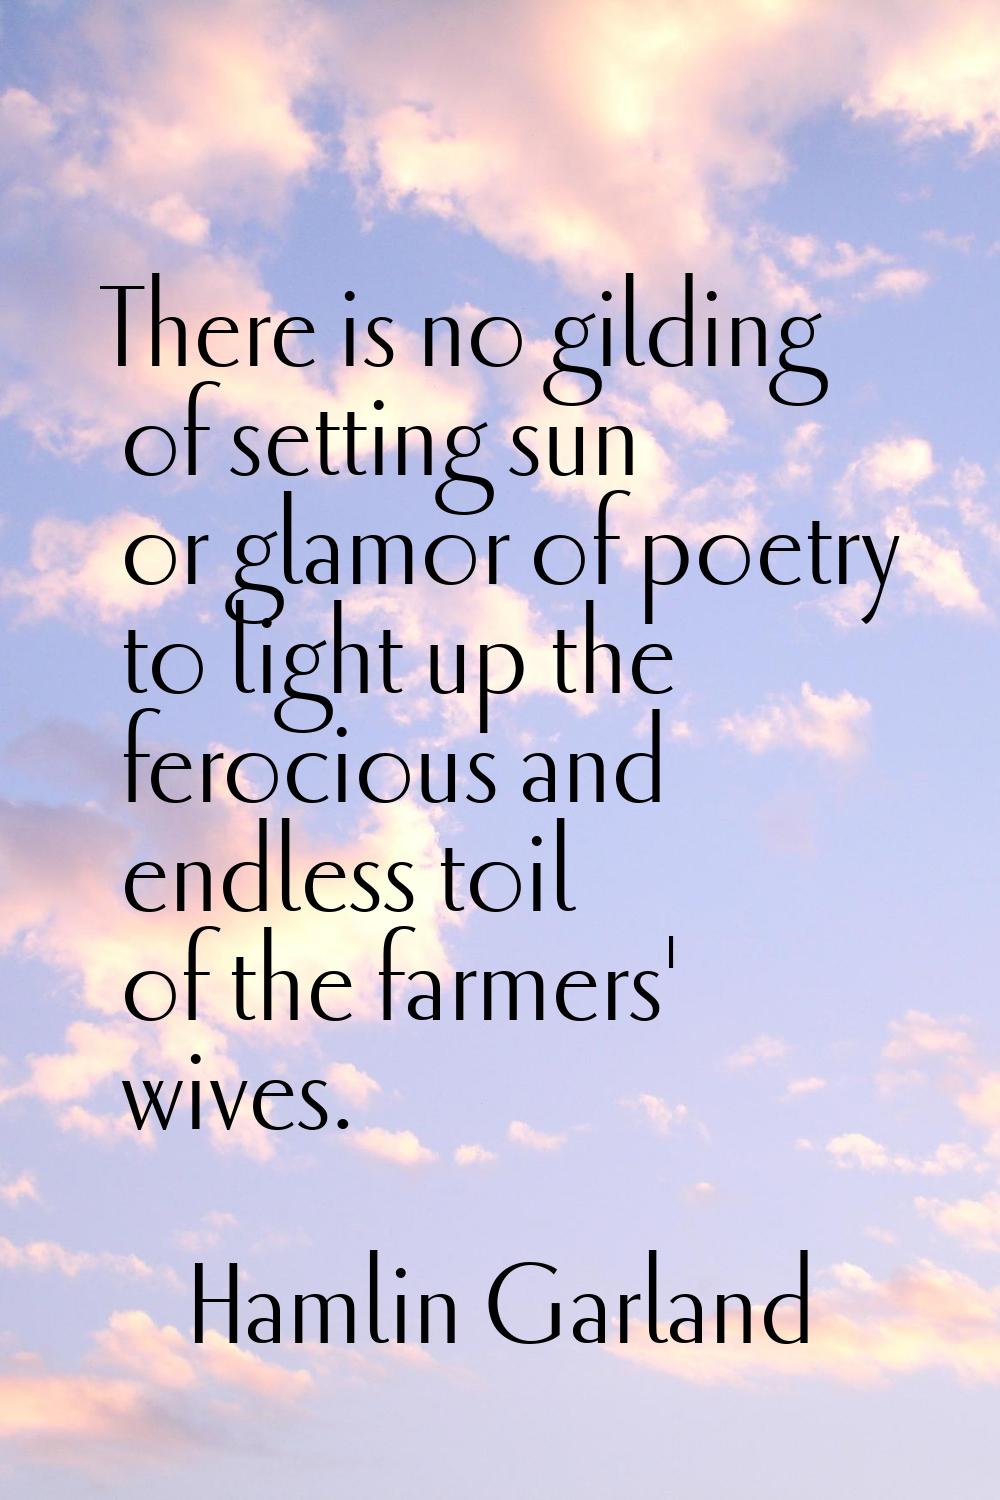 There is no gilding of setting sun or glamor of poetry to light up the ferocious and endless toil o